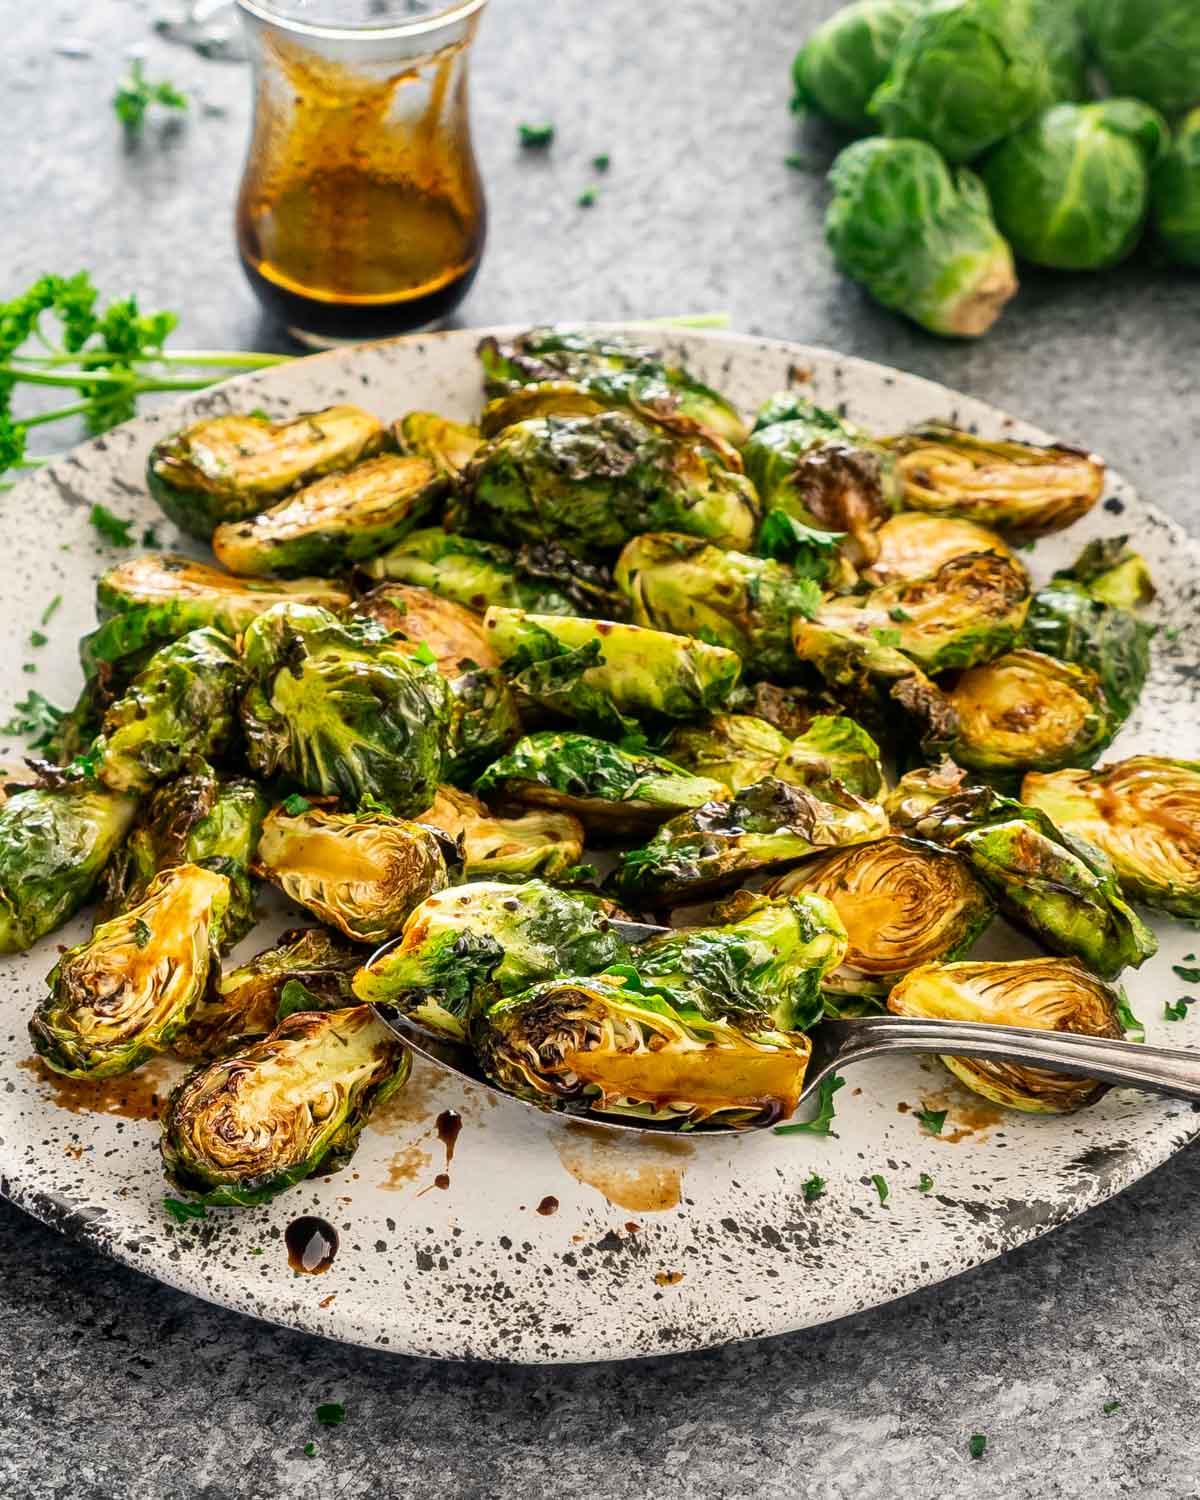 sweet and sour air fryer brussels sprouts in a white platter with a serving spoon.